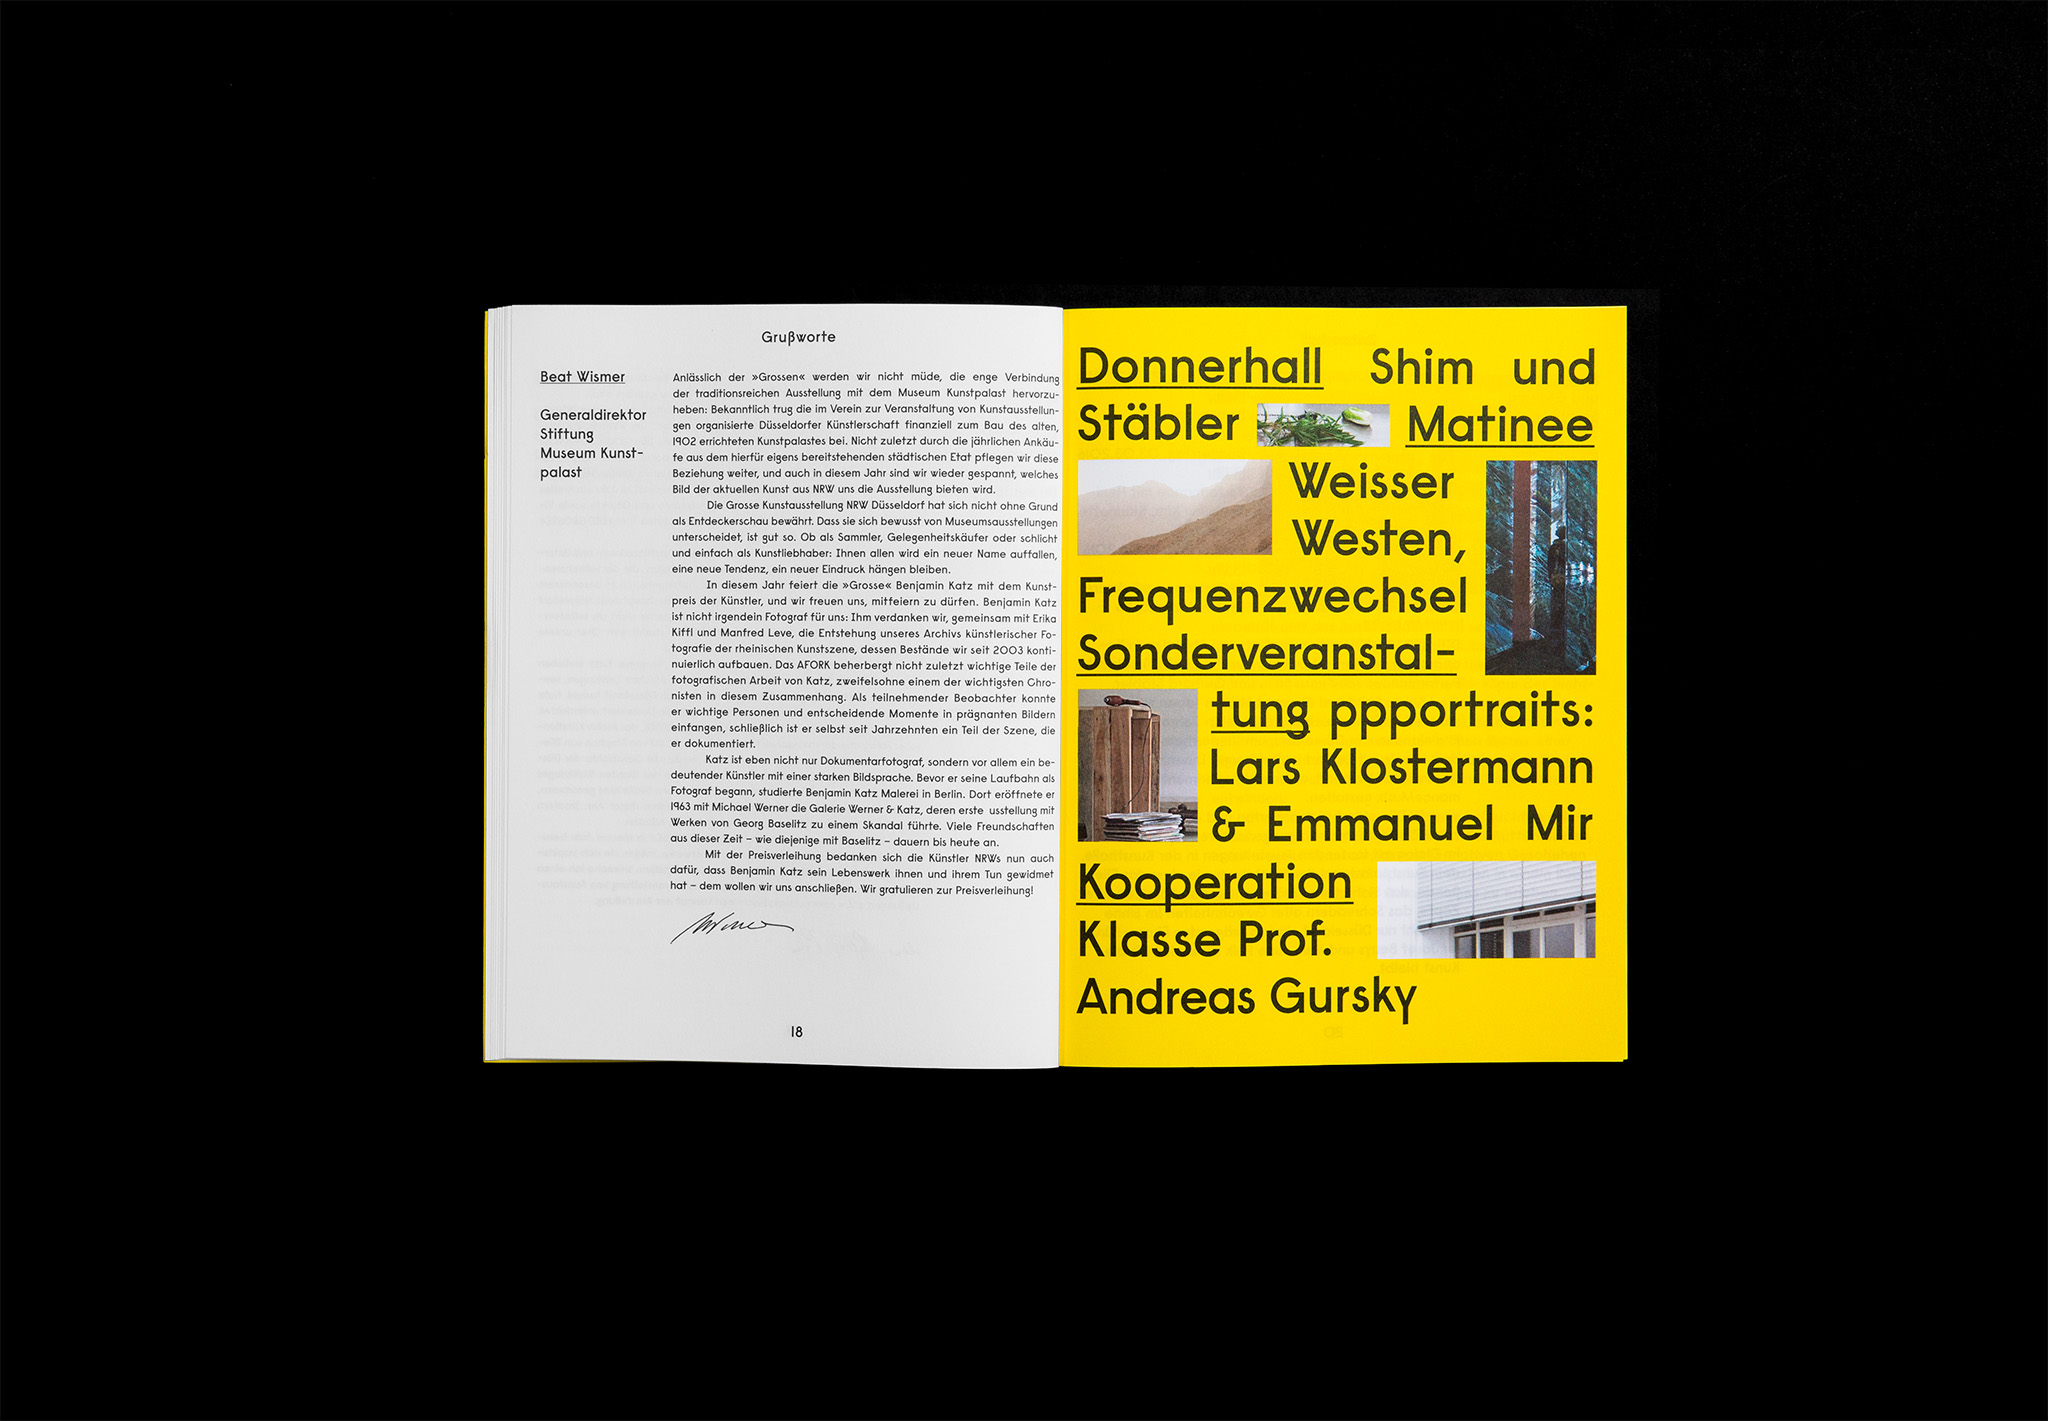 Doppelseite Kunstkatalog mit Text und Bild / Double page art catalog with text and image